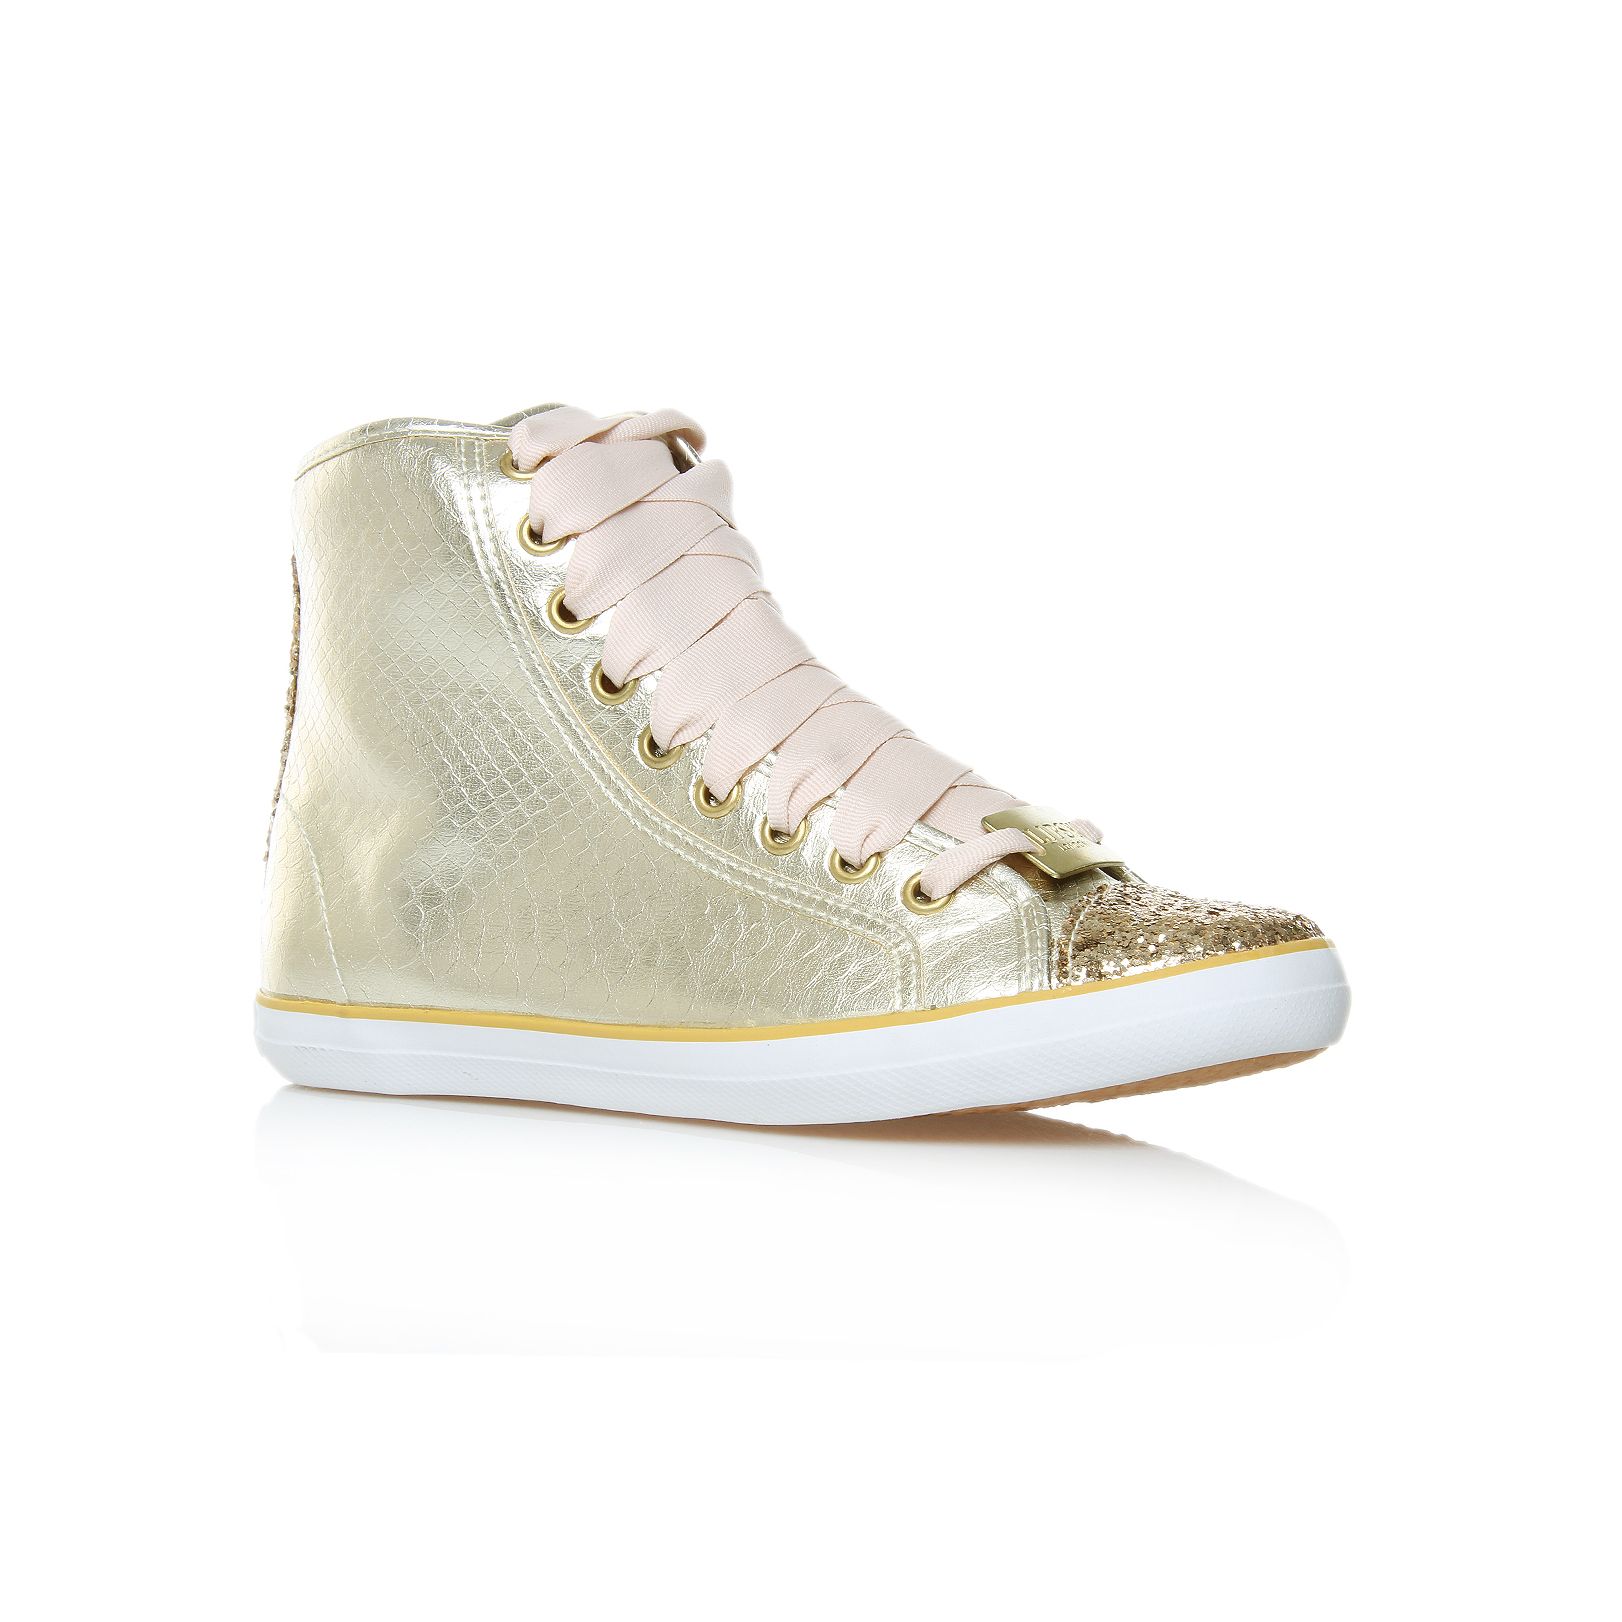 Lipsy Lavina Hitop Trainer Shoes in Gold | Lyst